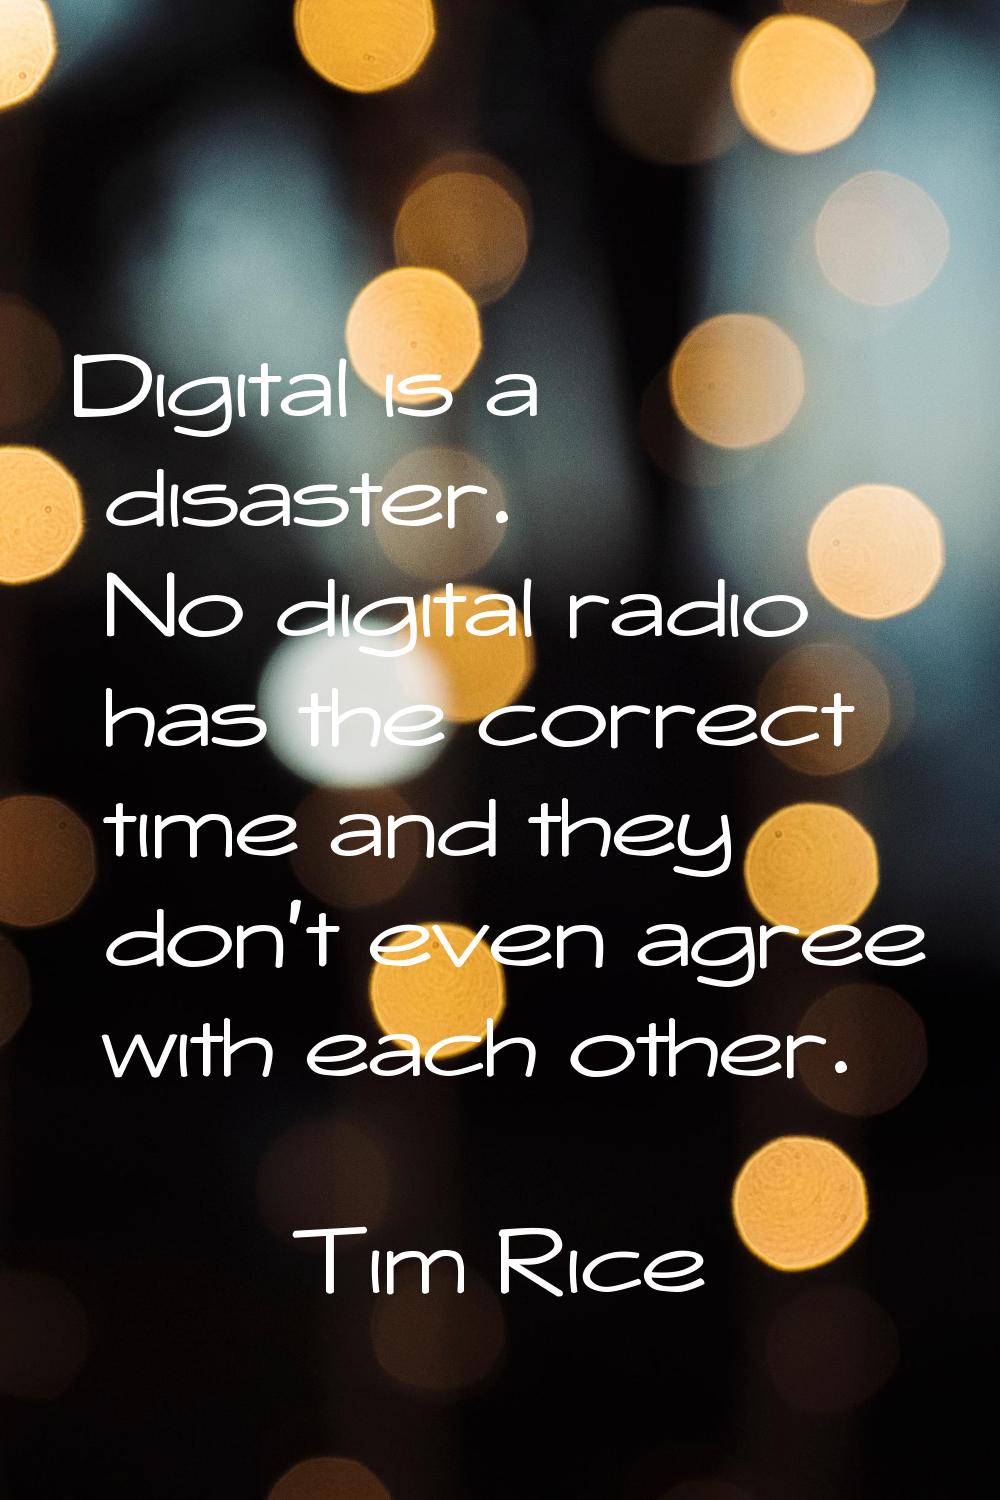 Digital is a disaster. No digital radio has the correct time and they don't even agree with each ot